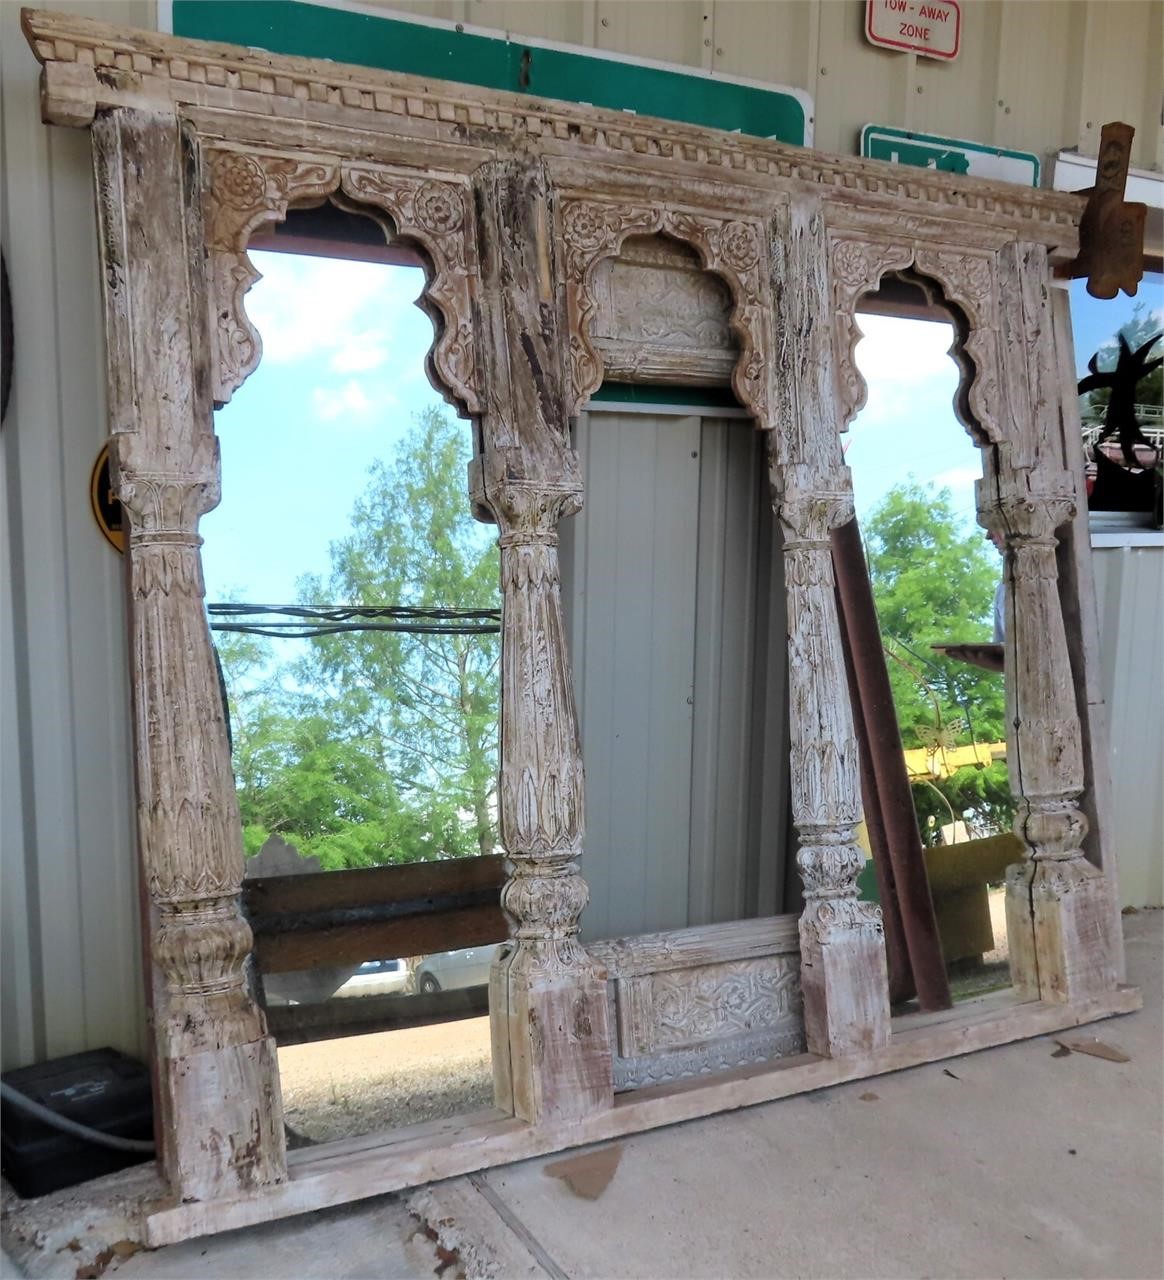 nicely carved mirror, approx 84"x84"